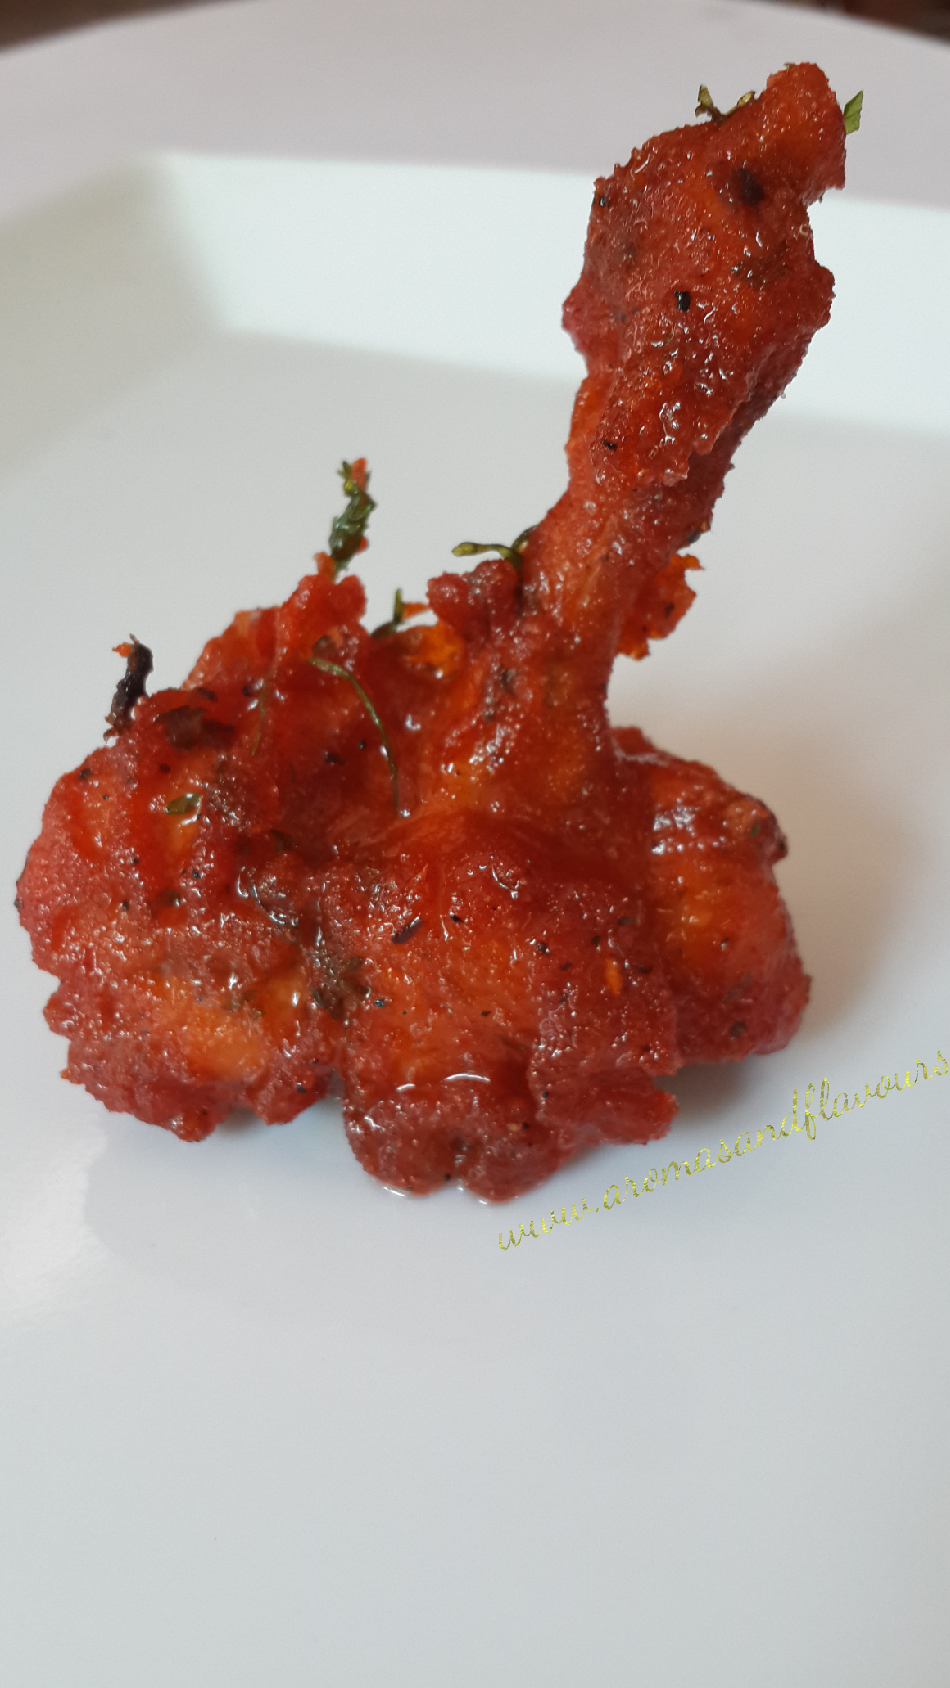 Juicy chicken lollipops just for you